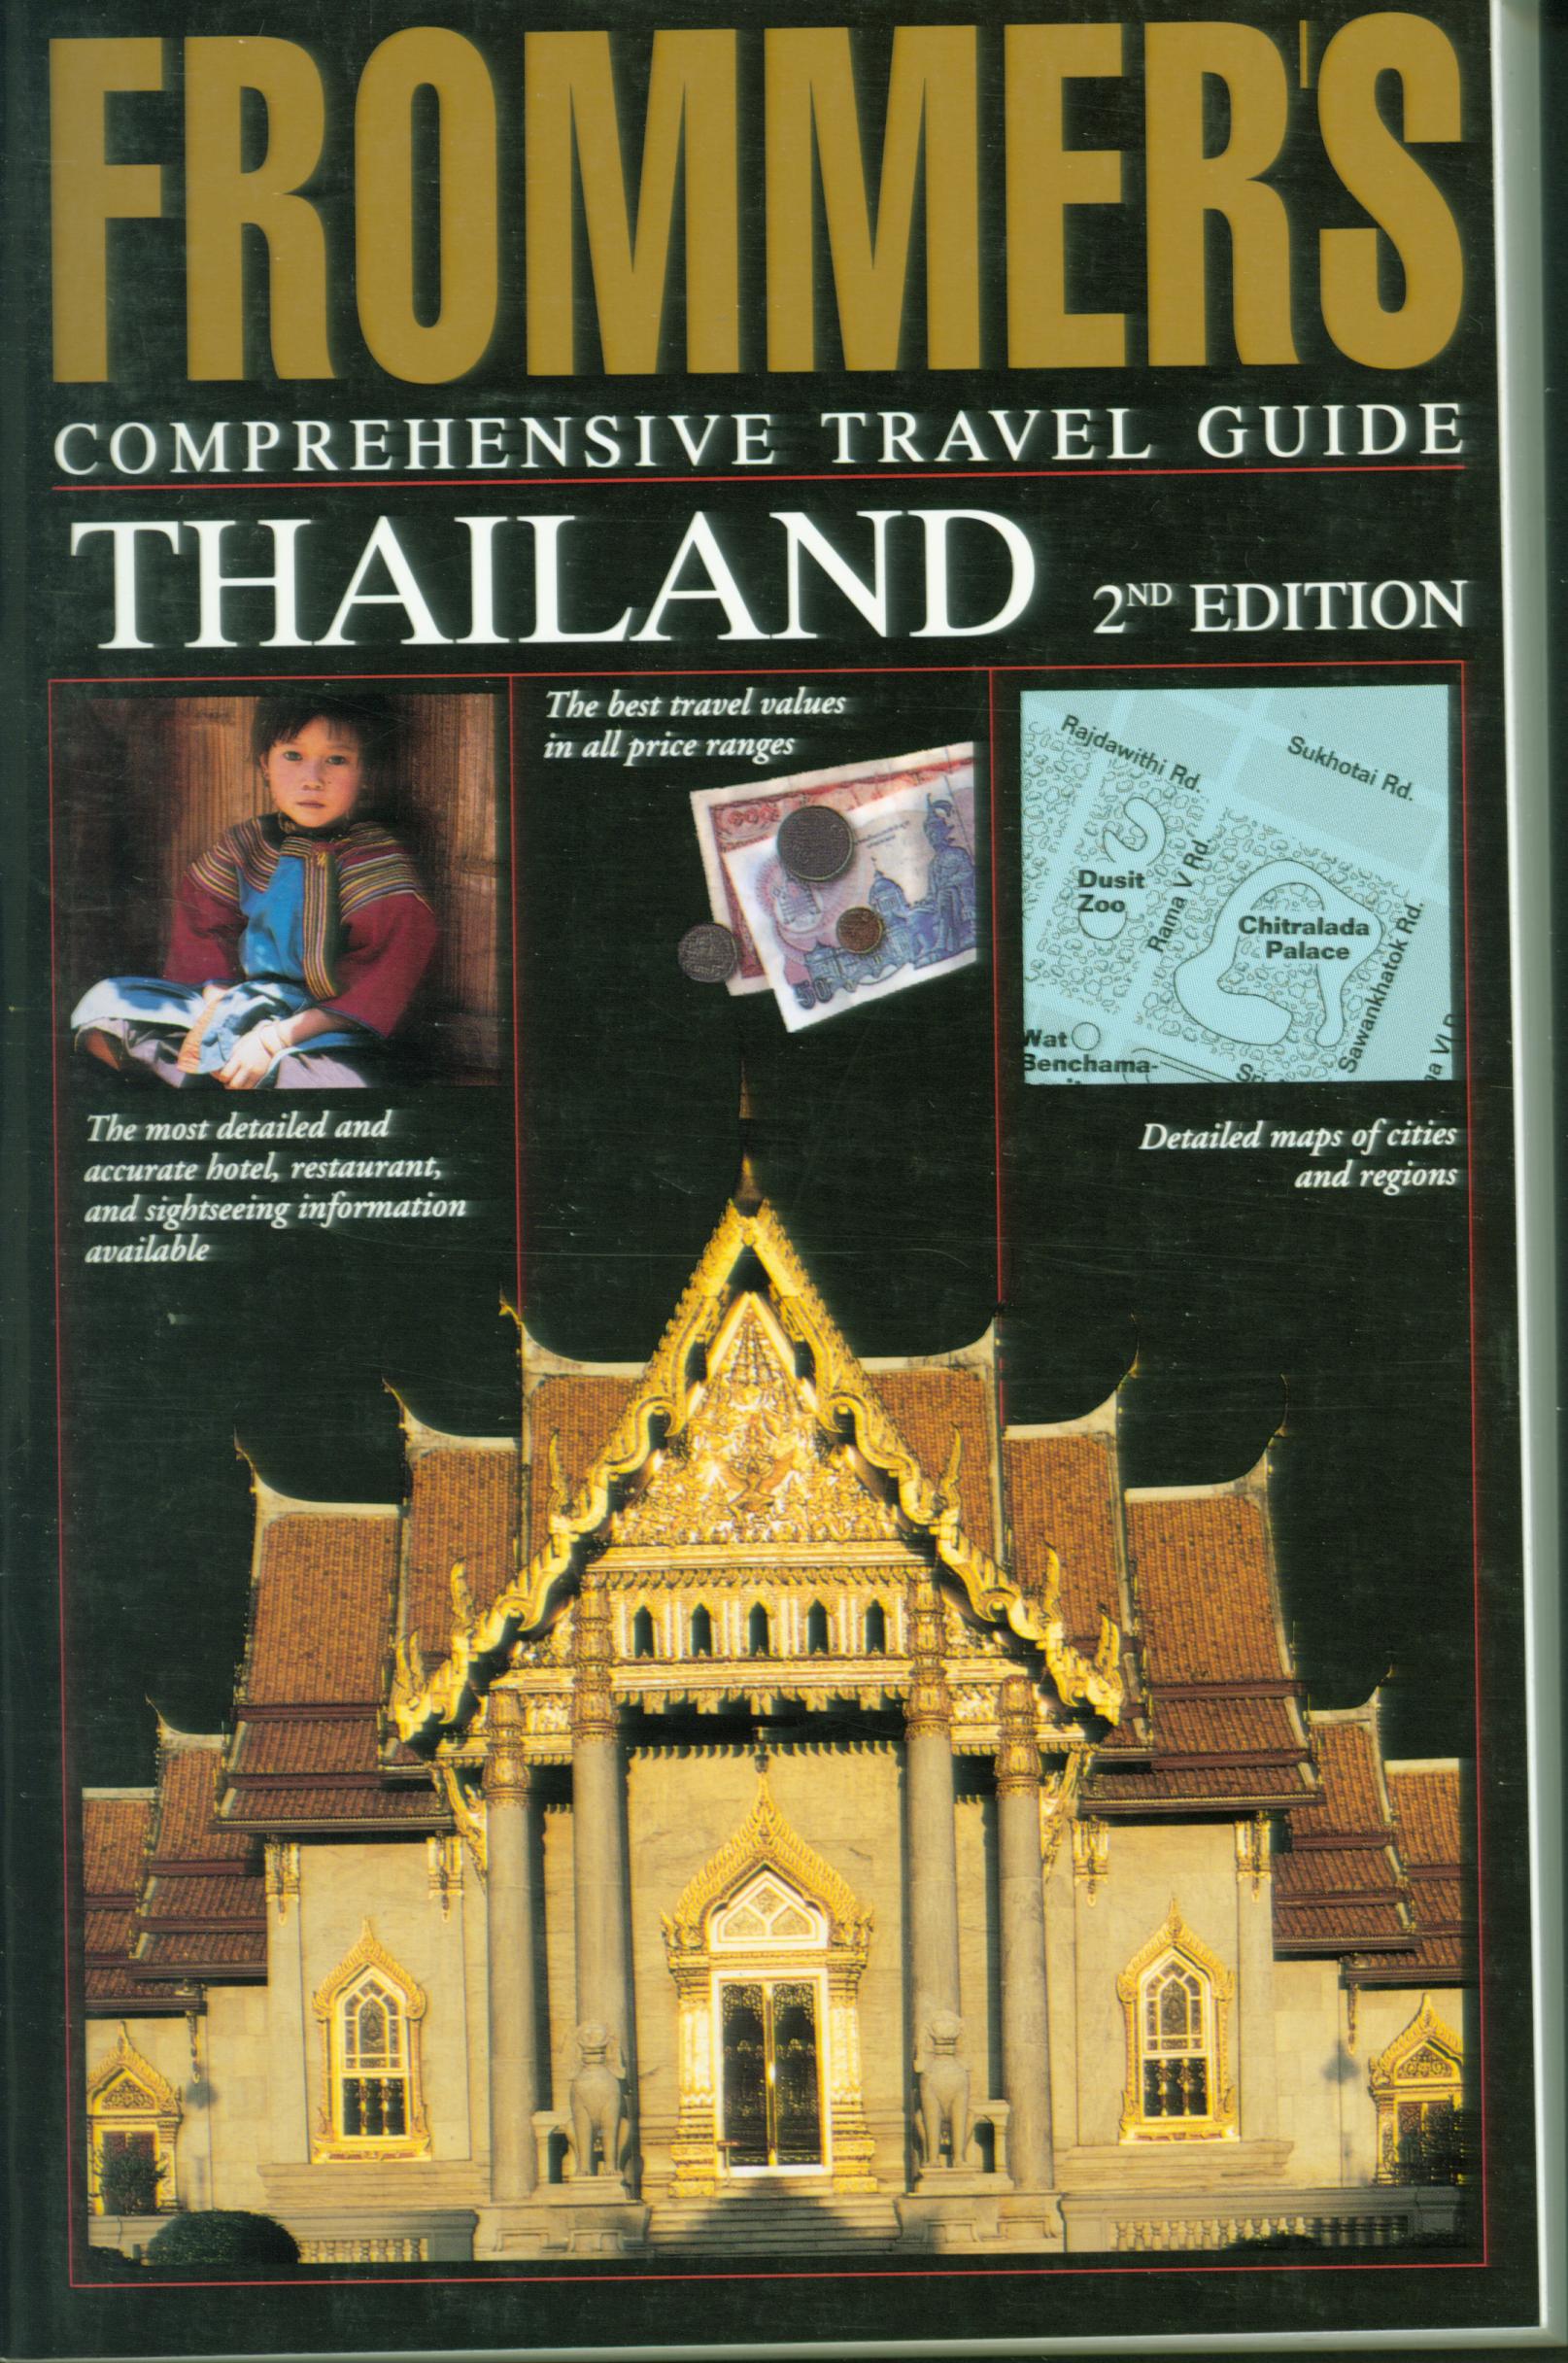 FROMMER'S COMPREHENSIVE TRAVEL GUIIDE: Thailand.